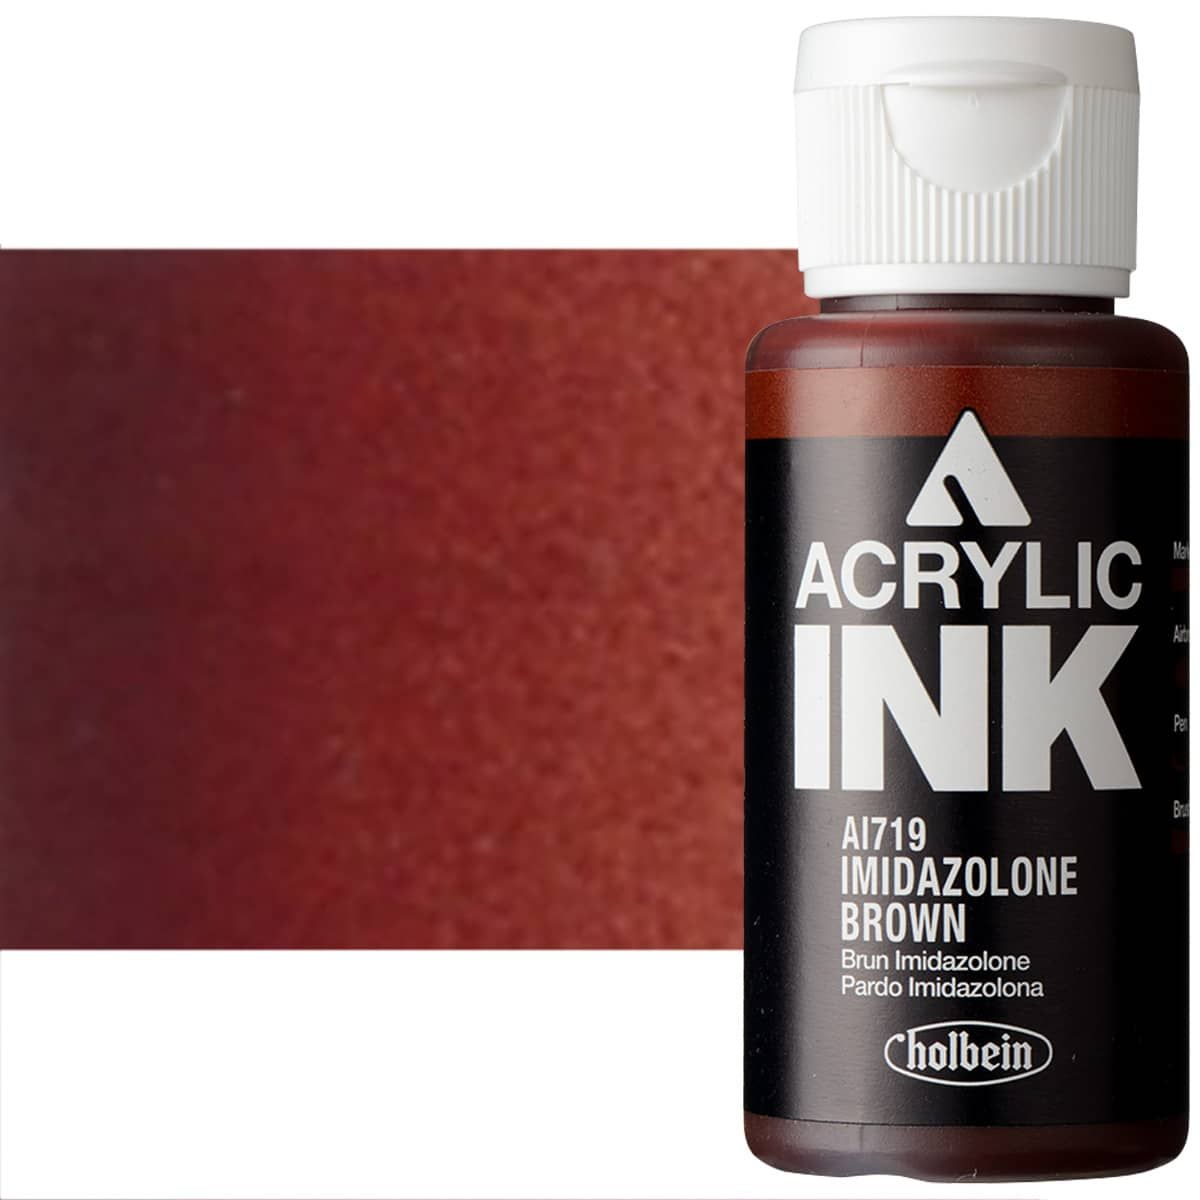 Holbein Acrylic Ink - Imidazolone Brown, 30ml